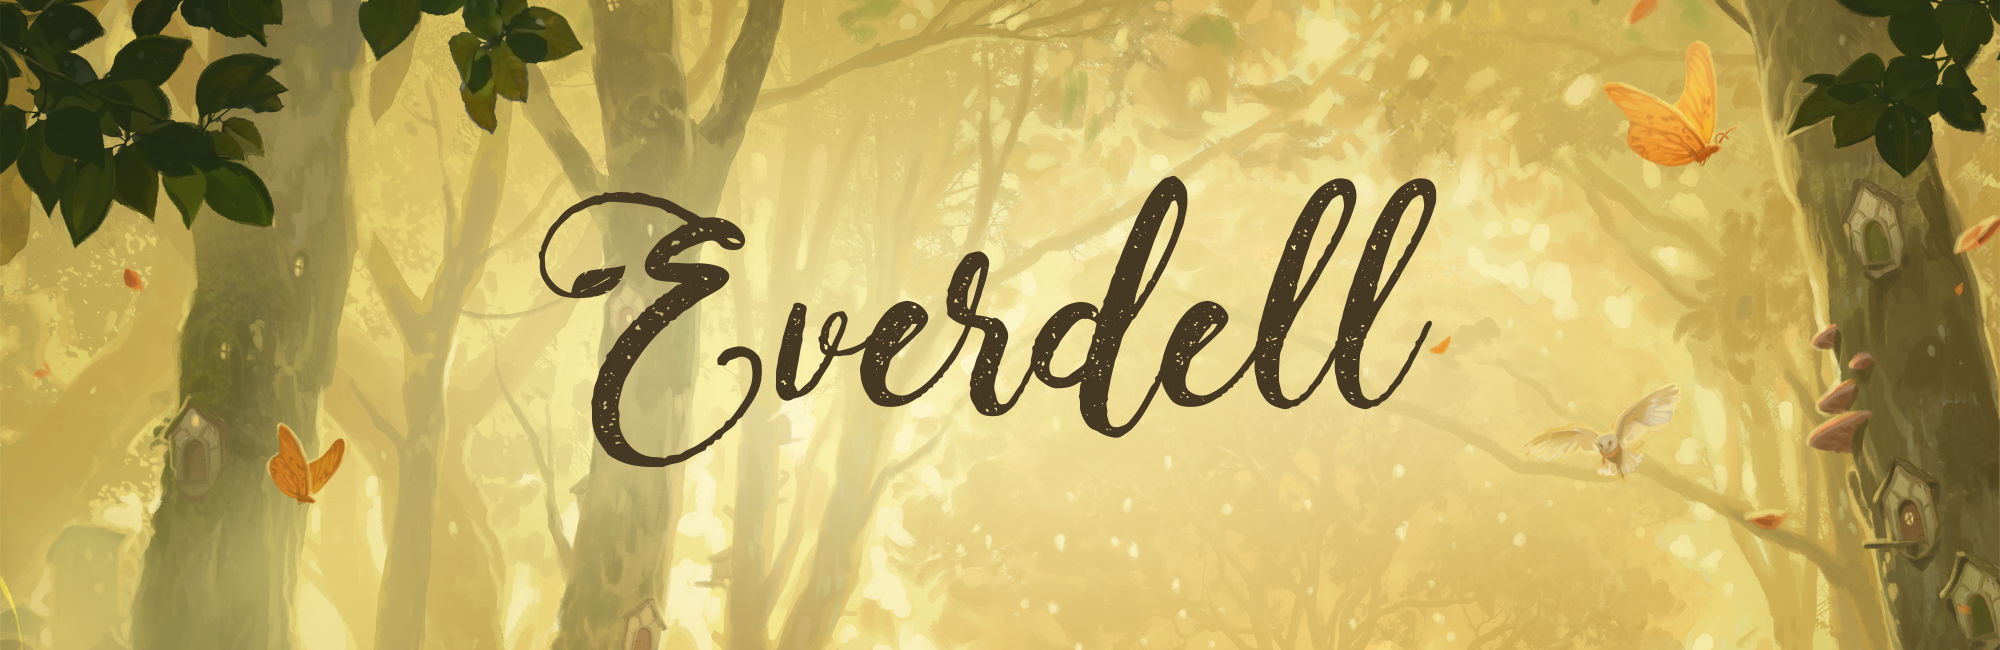 Everdell Standard edition tabletop game